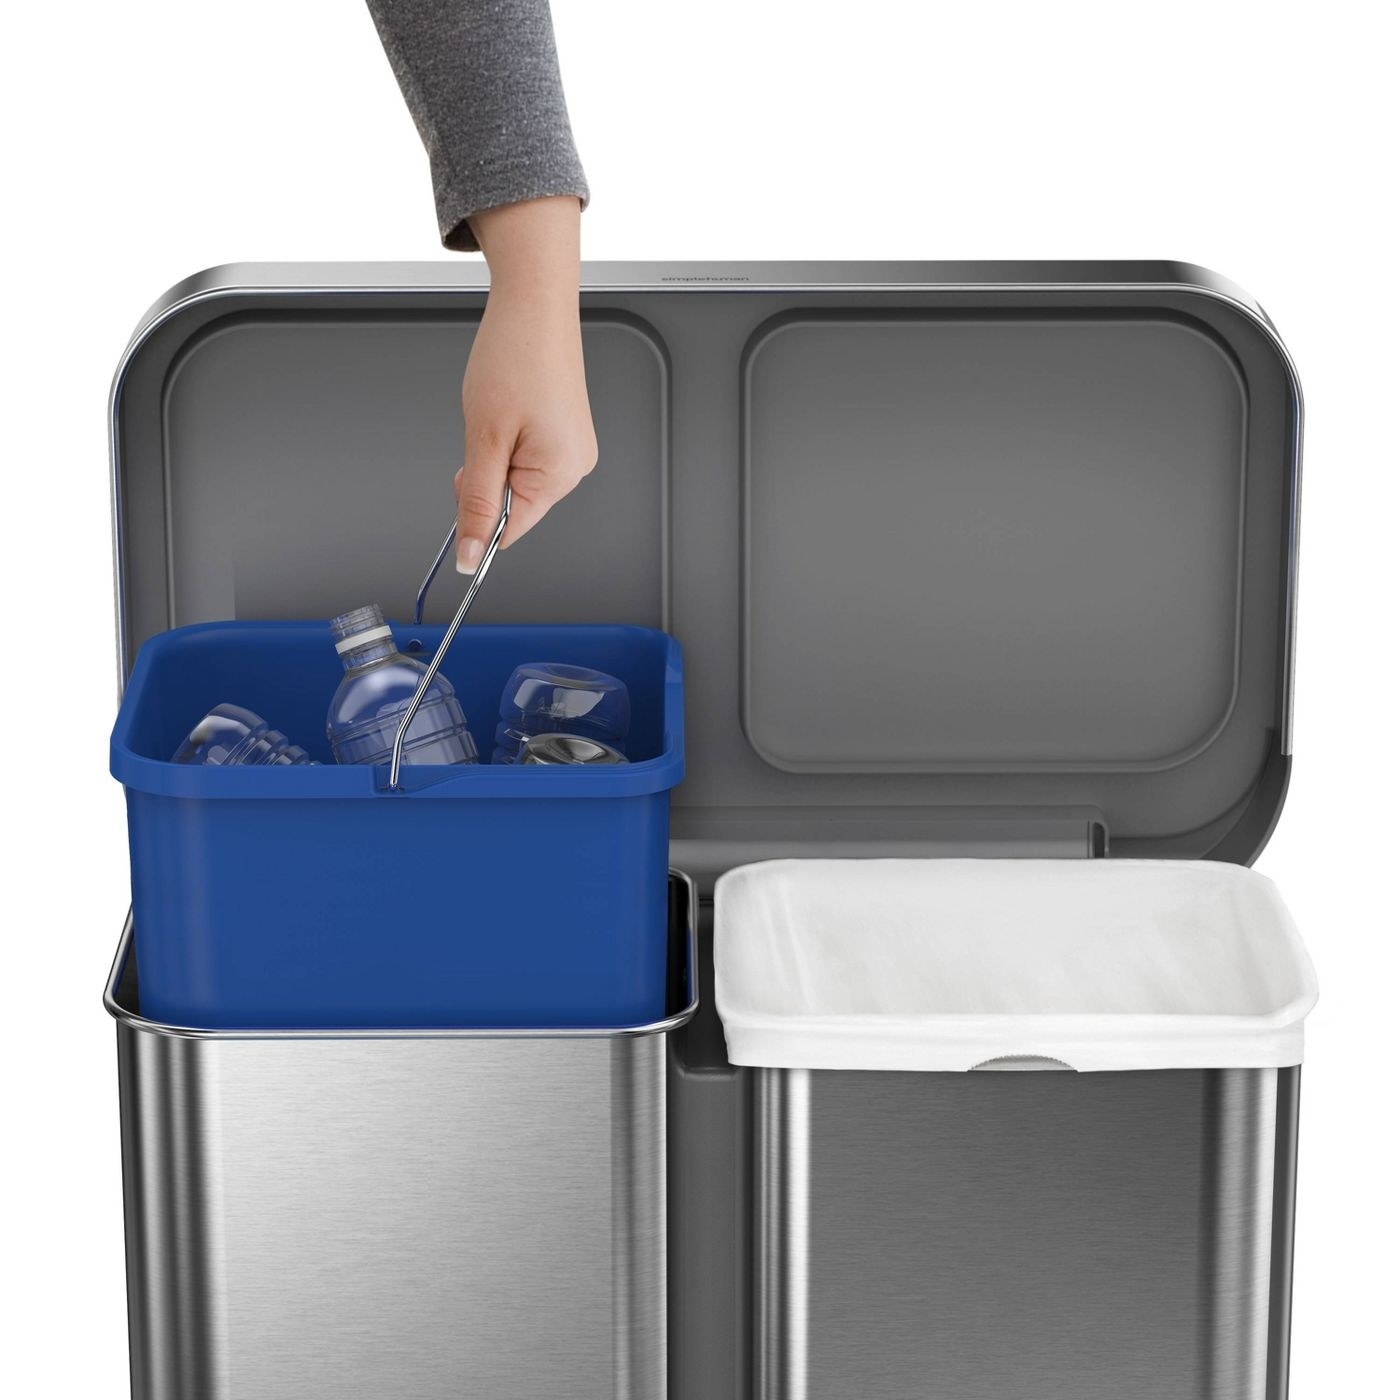 a silver trash can with one bin for recycling and one bin for trash